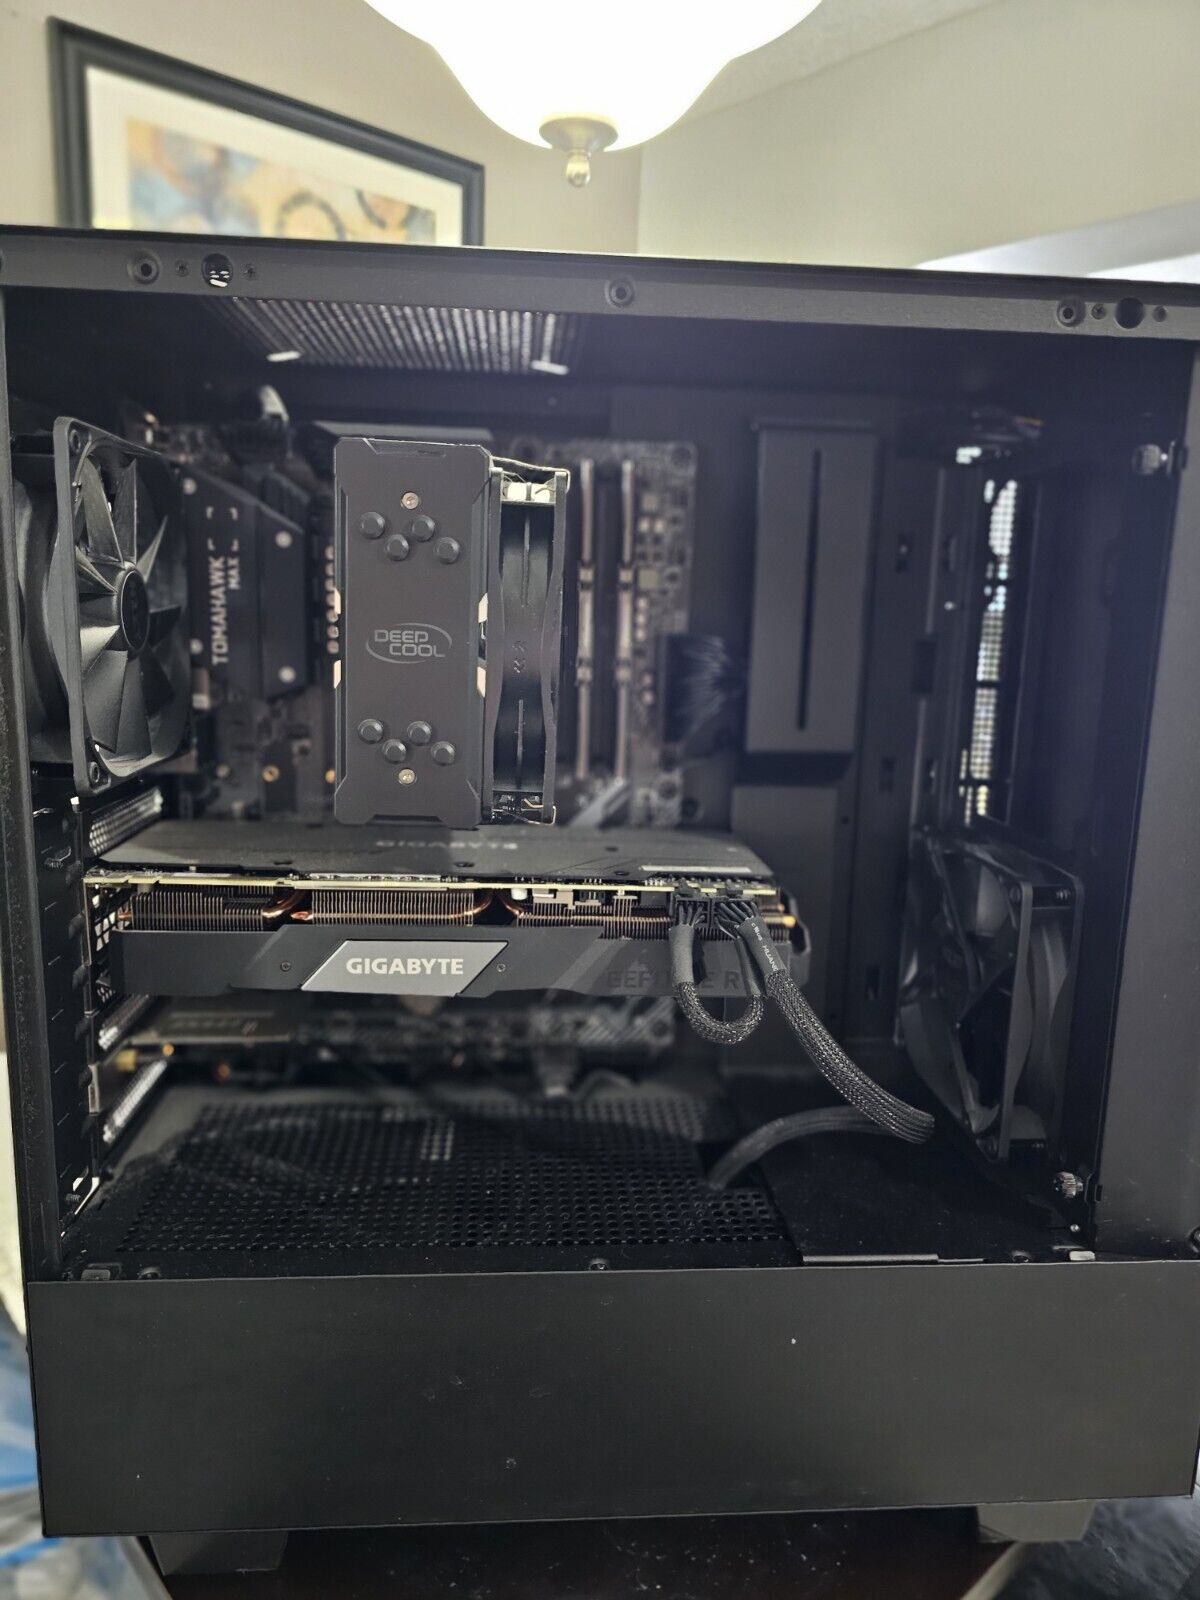 nzxt gaming pc, RTX 2070 Super, Ryzen 7, Used Still Works Great 